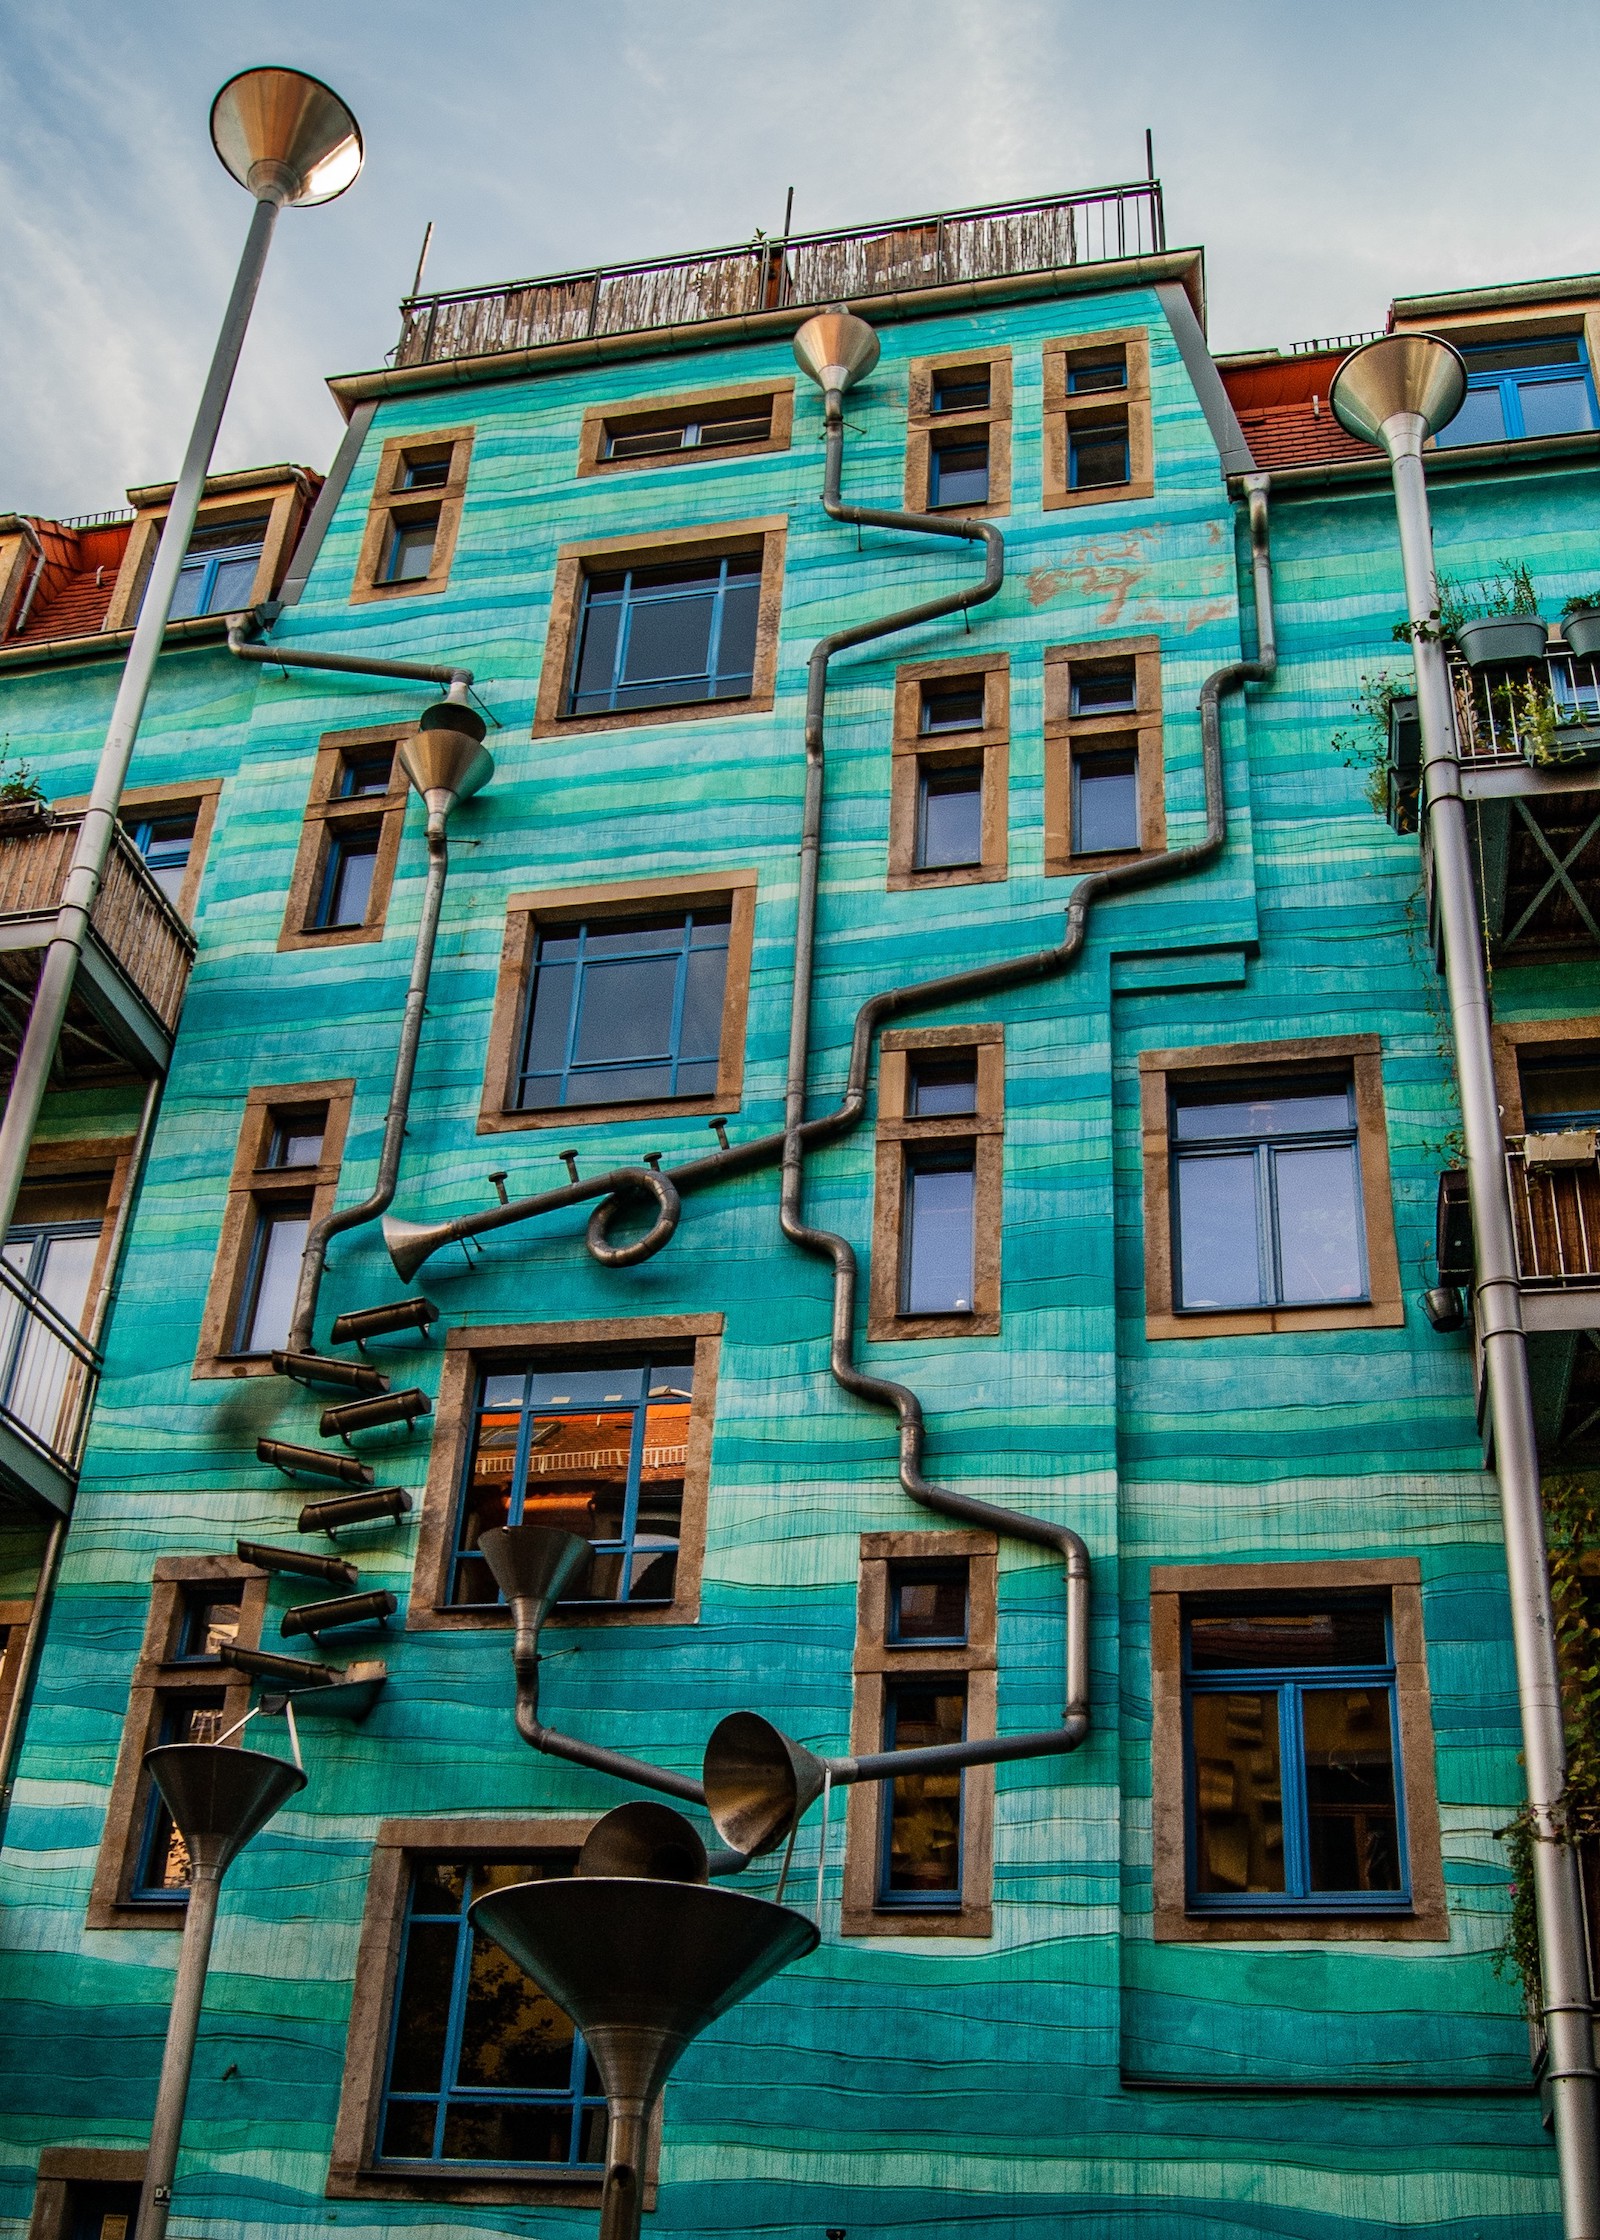 A colourful blue facade in Kunsthofpassage in Neustadt, Dresden. Photo by @conjulia